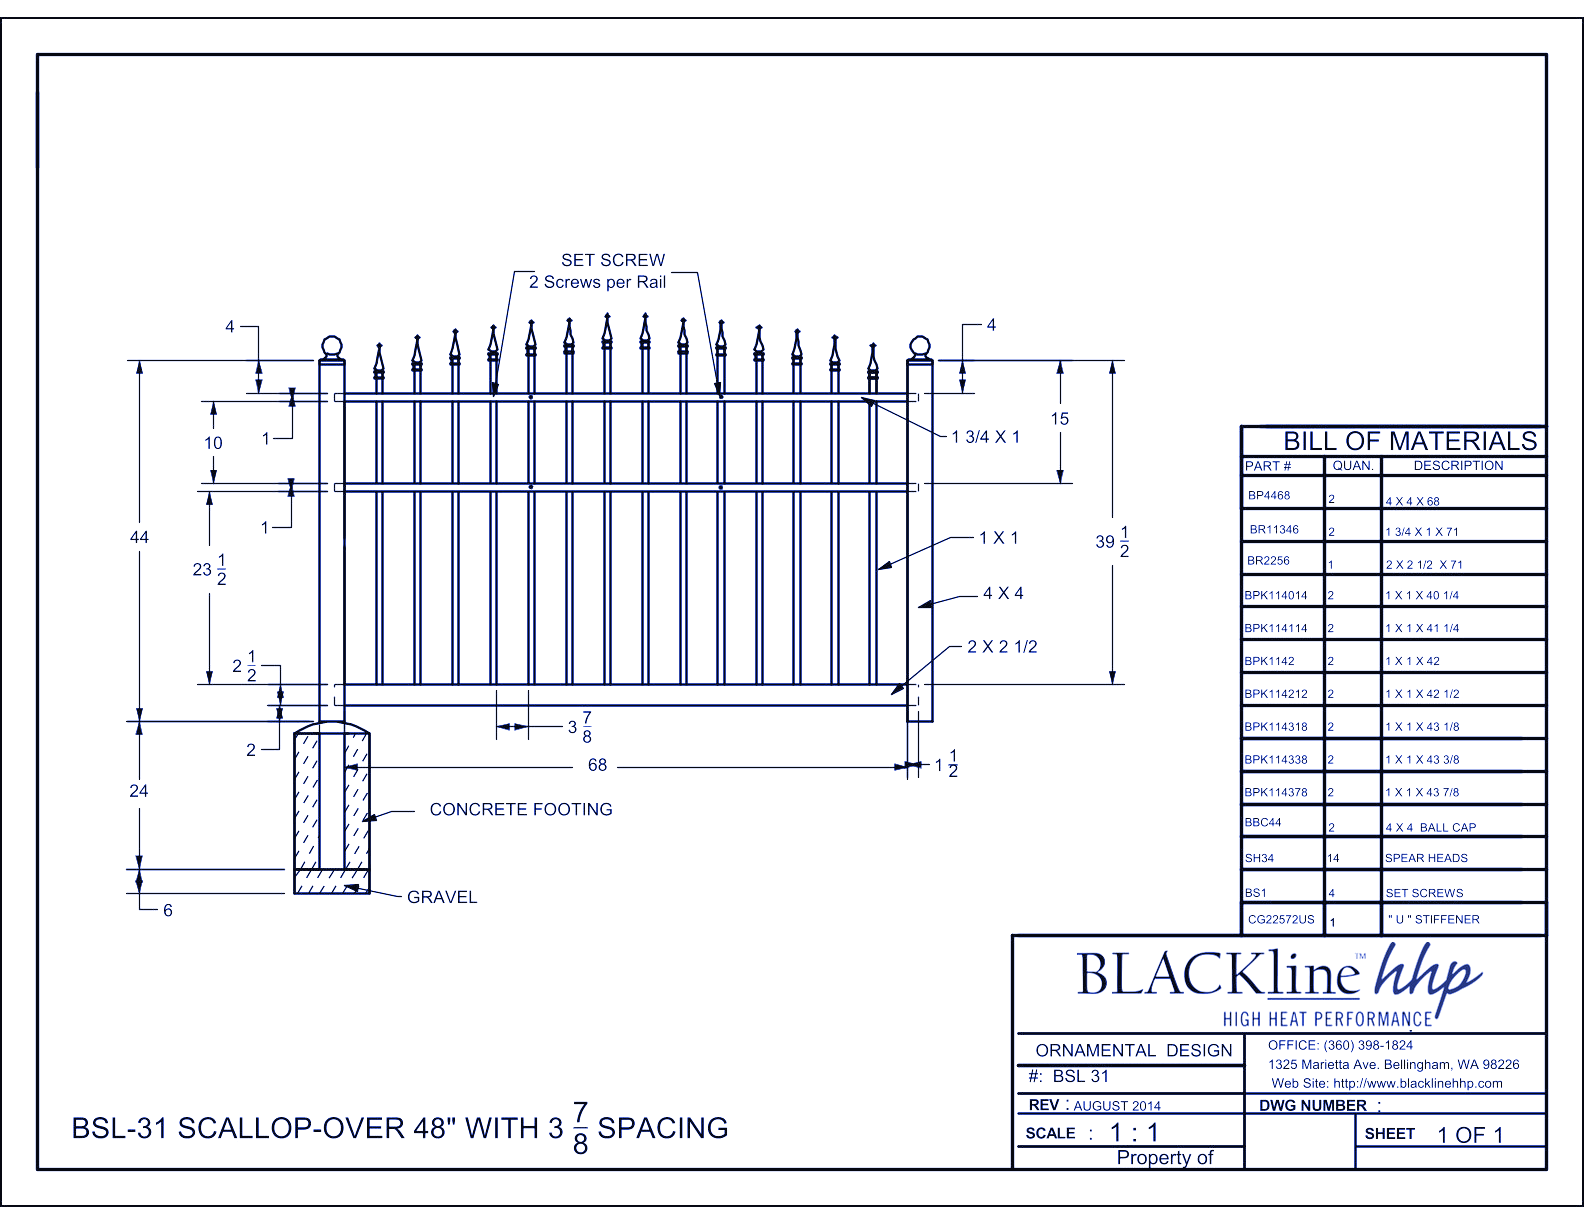 BSL-31: Scallop-Over 48" with 3 7/8” Spacing